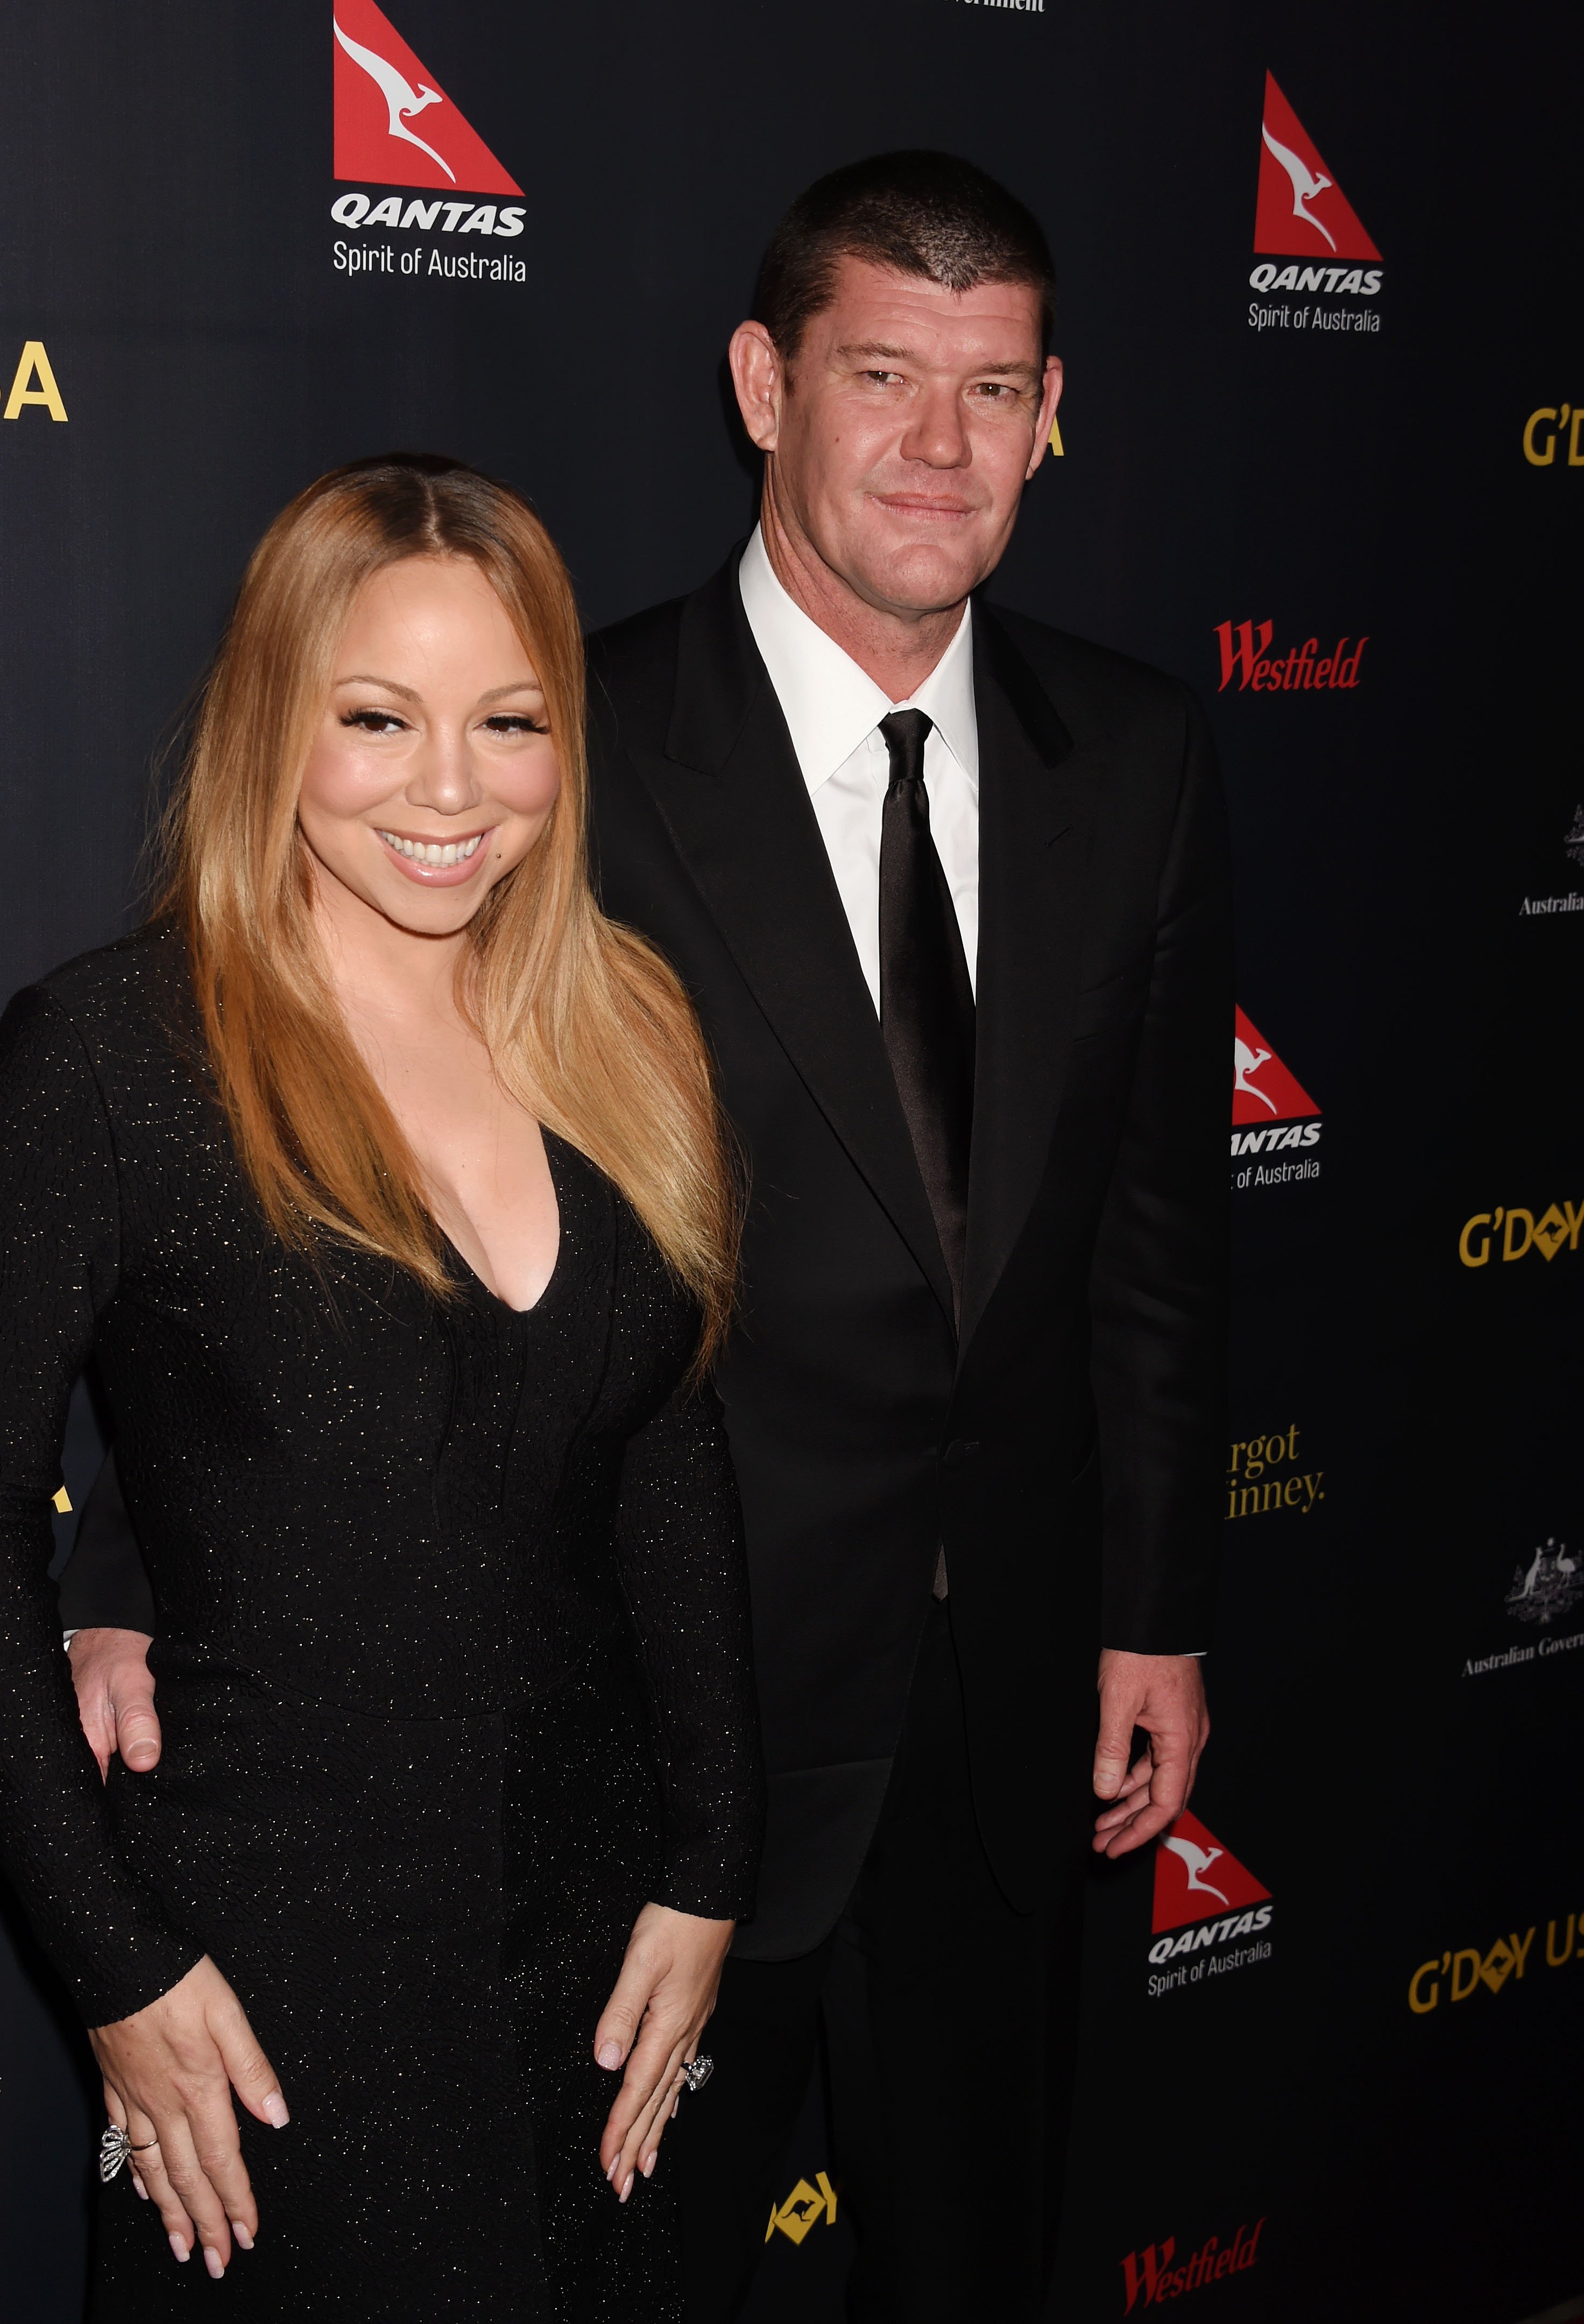 Singer/songwriter Mariah Carey (L) and businessman/philanthropist James Packer arrive at the 2016 G'Day Los Angeles Gala at Vibiana on January 28, 2016 in Los Angeles, California | Source: Getty Images